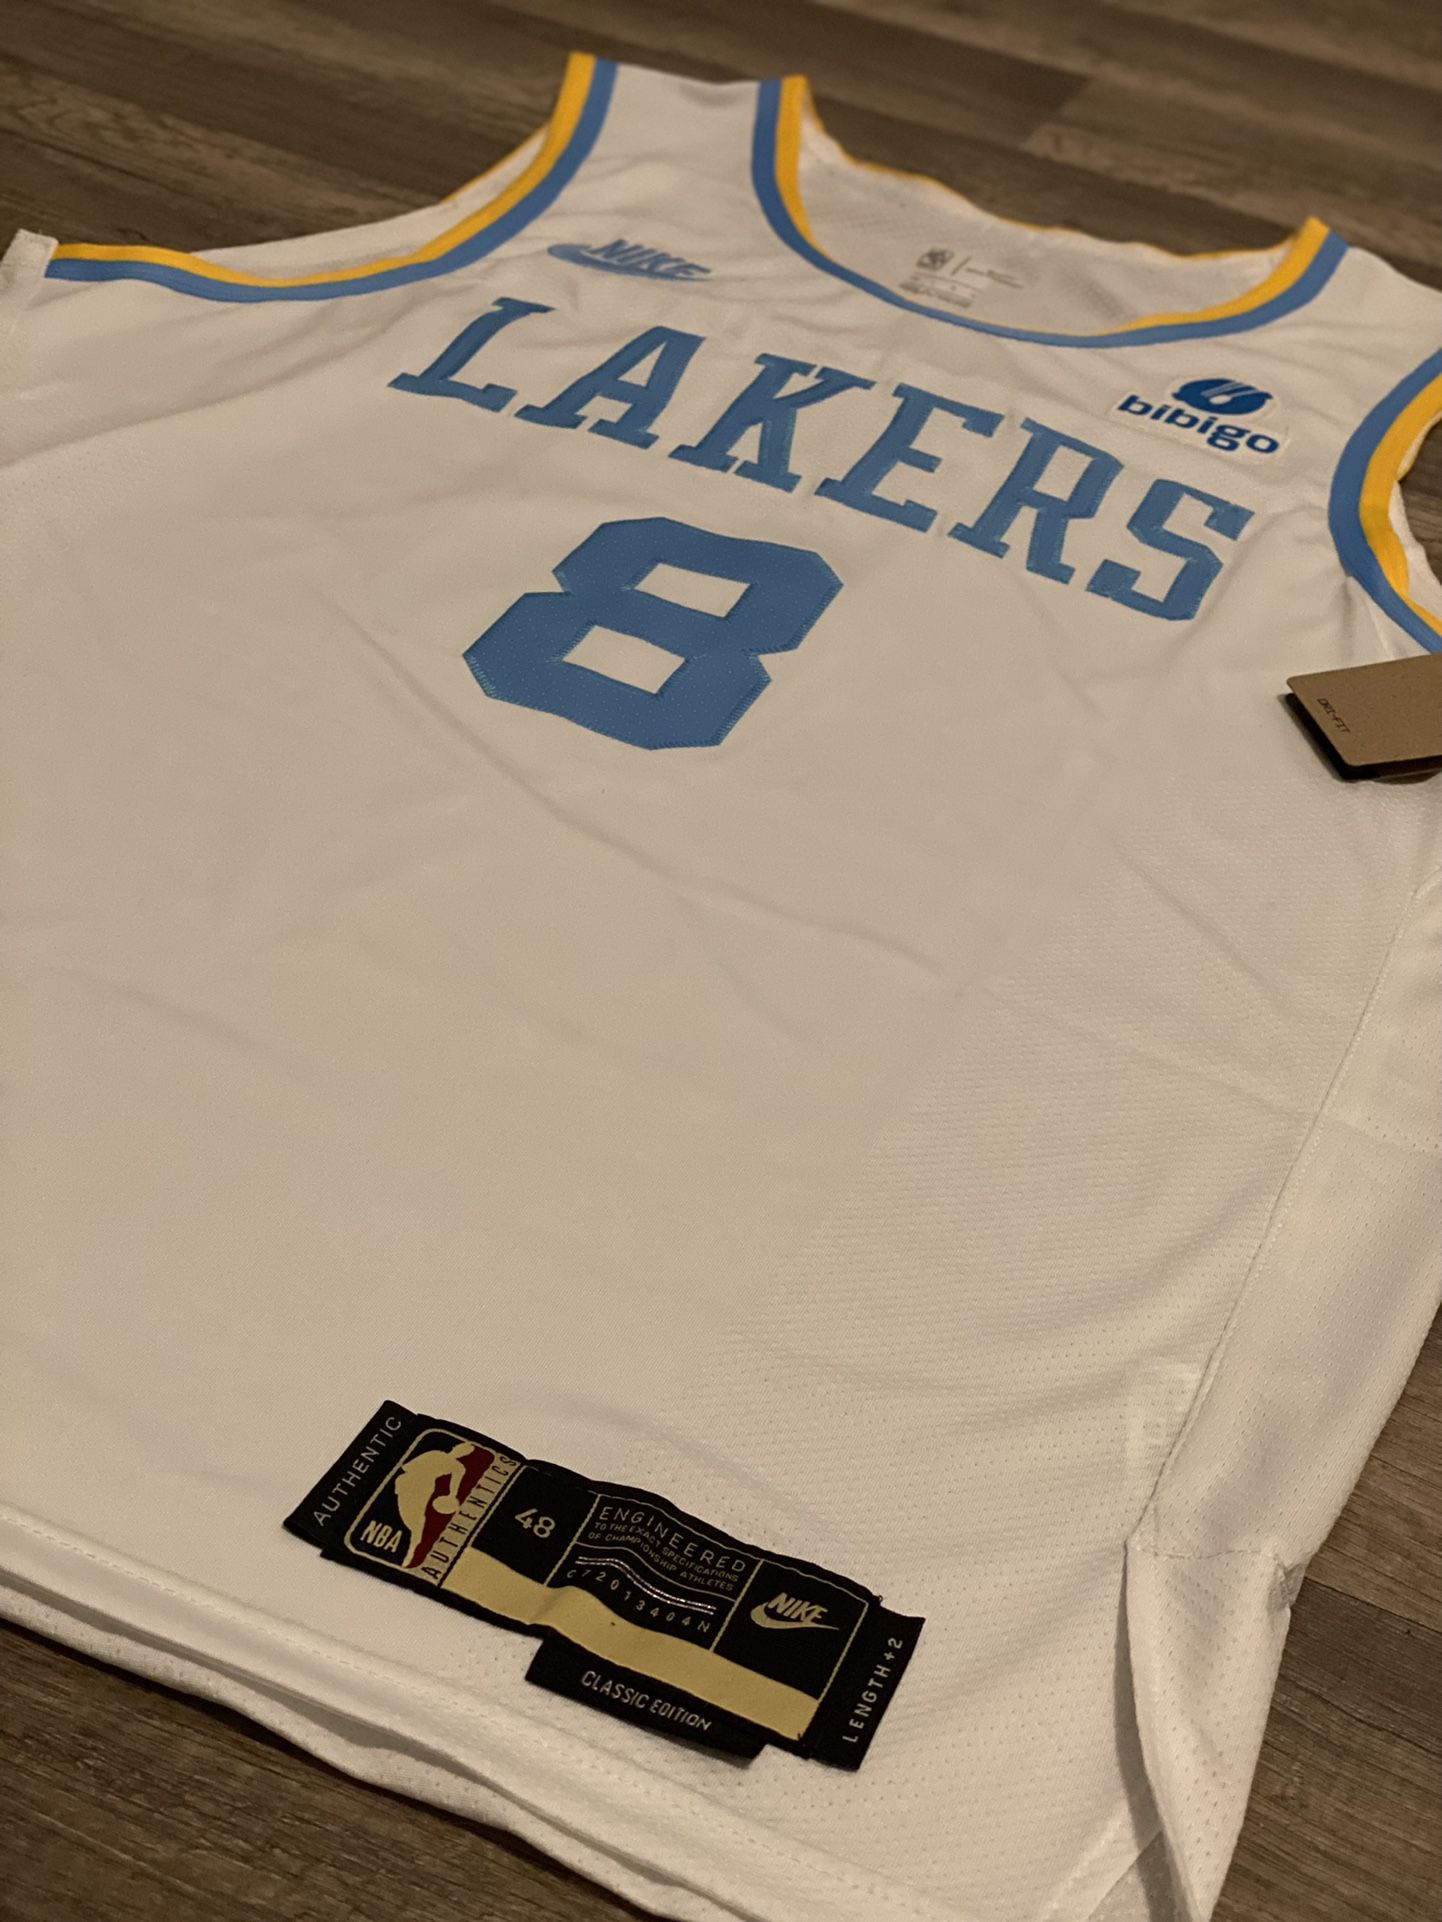 Kobe Bryant NEW LA Lakers Classic Edition Basketball Vaporknit Jersey SZ M  (44) & L (48) for Sale in Downey, CA - OfferUp